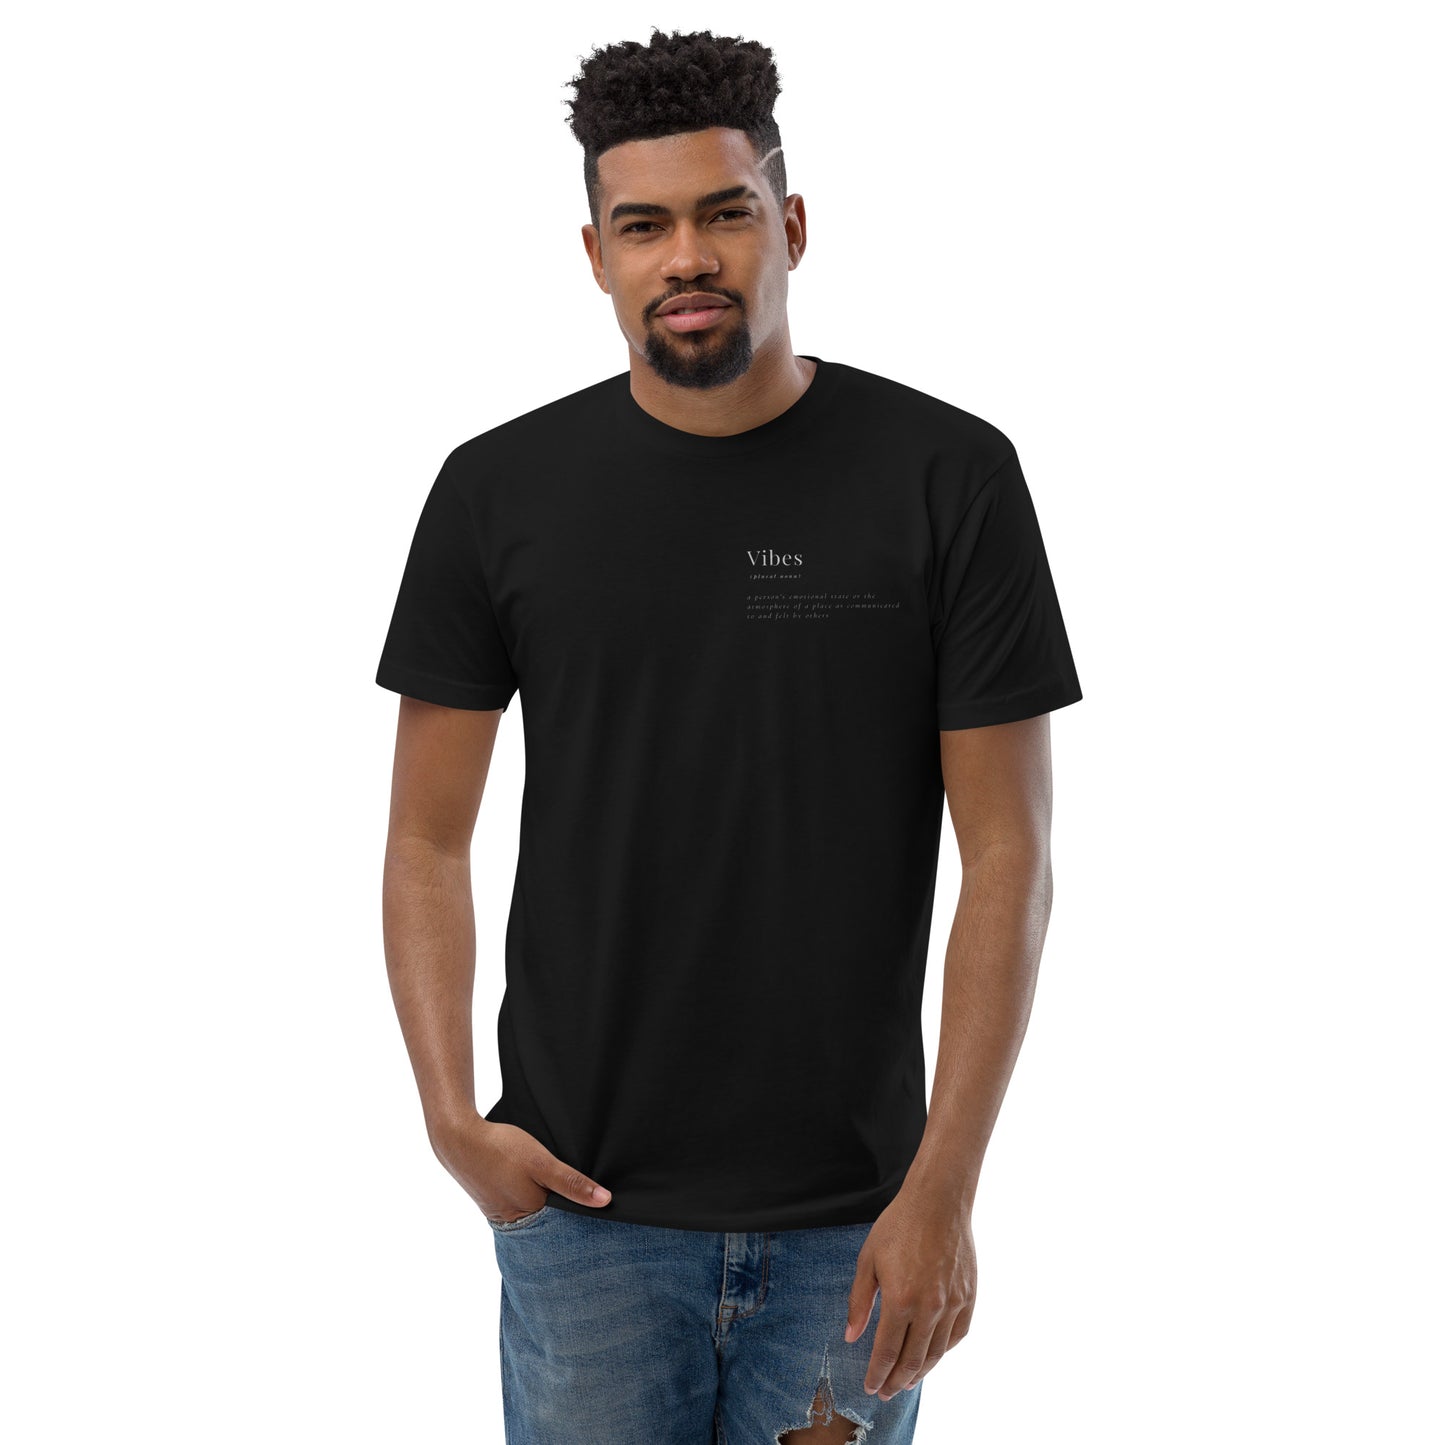 Vibes definition  T-shirt